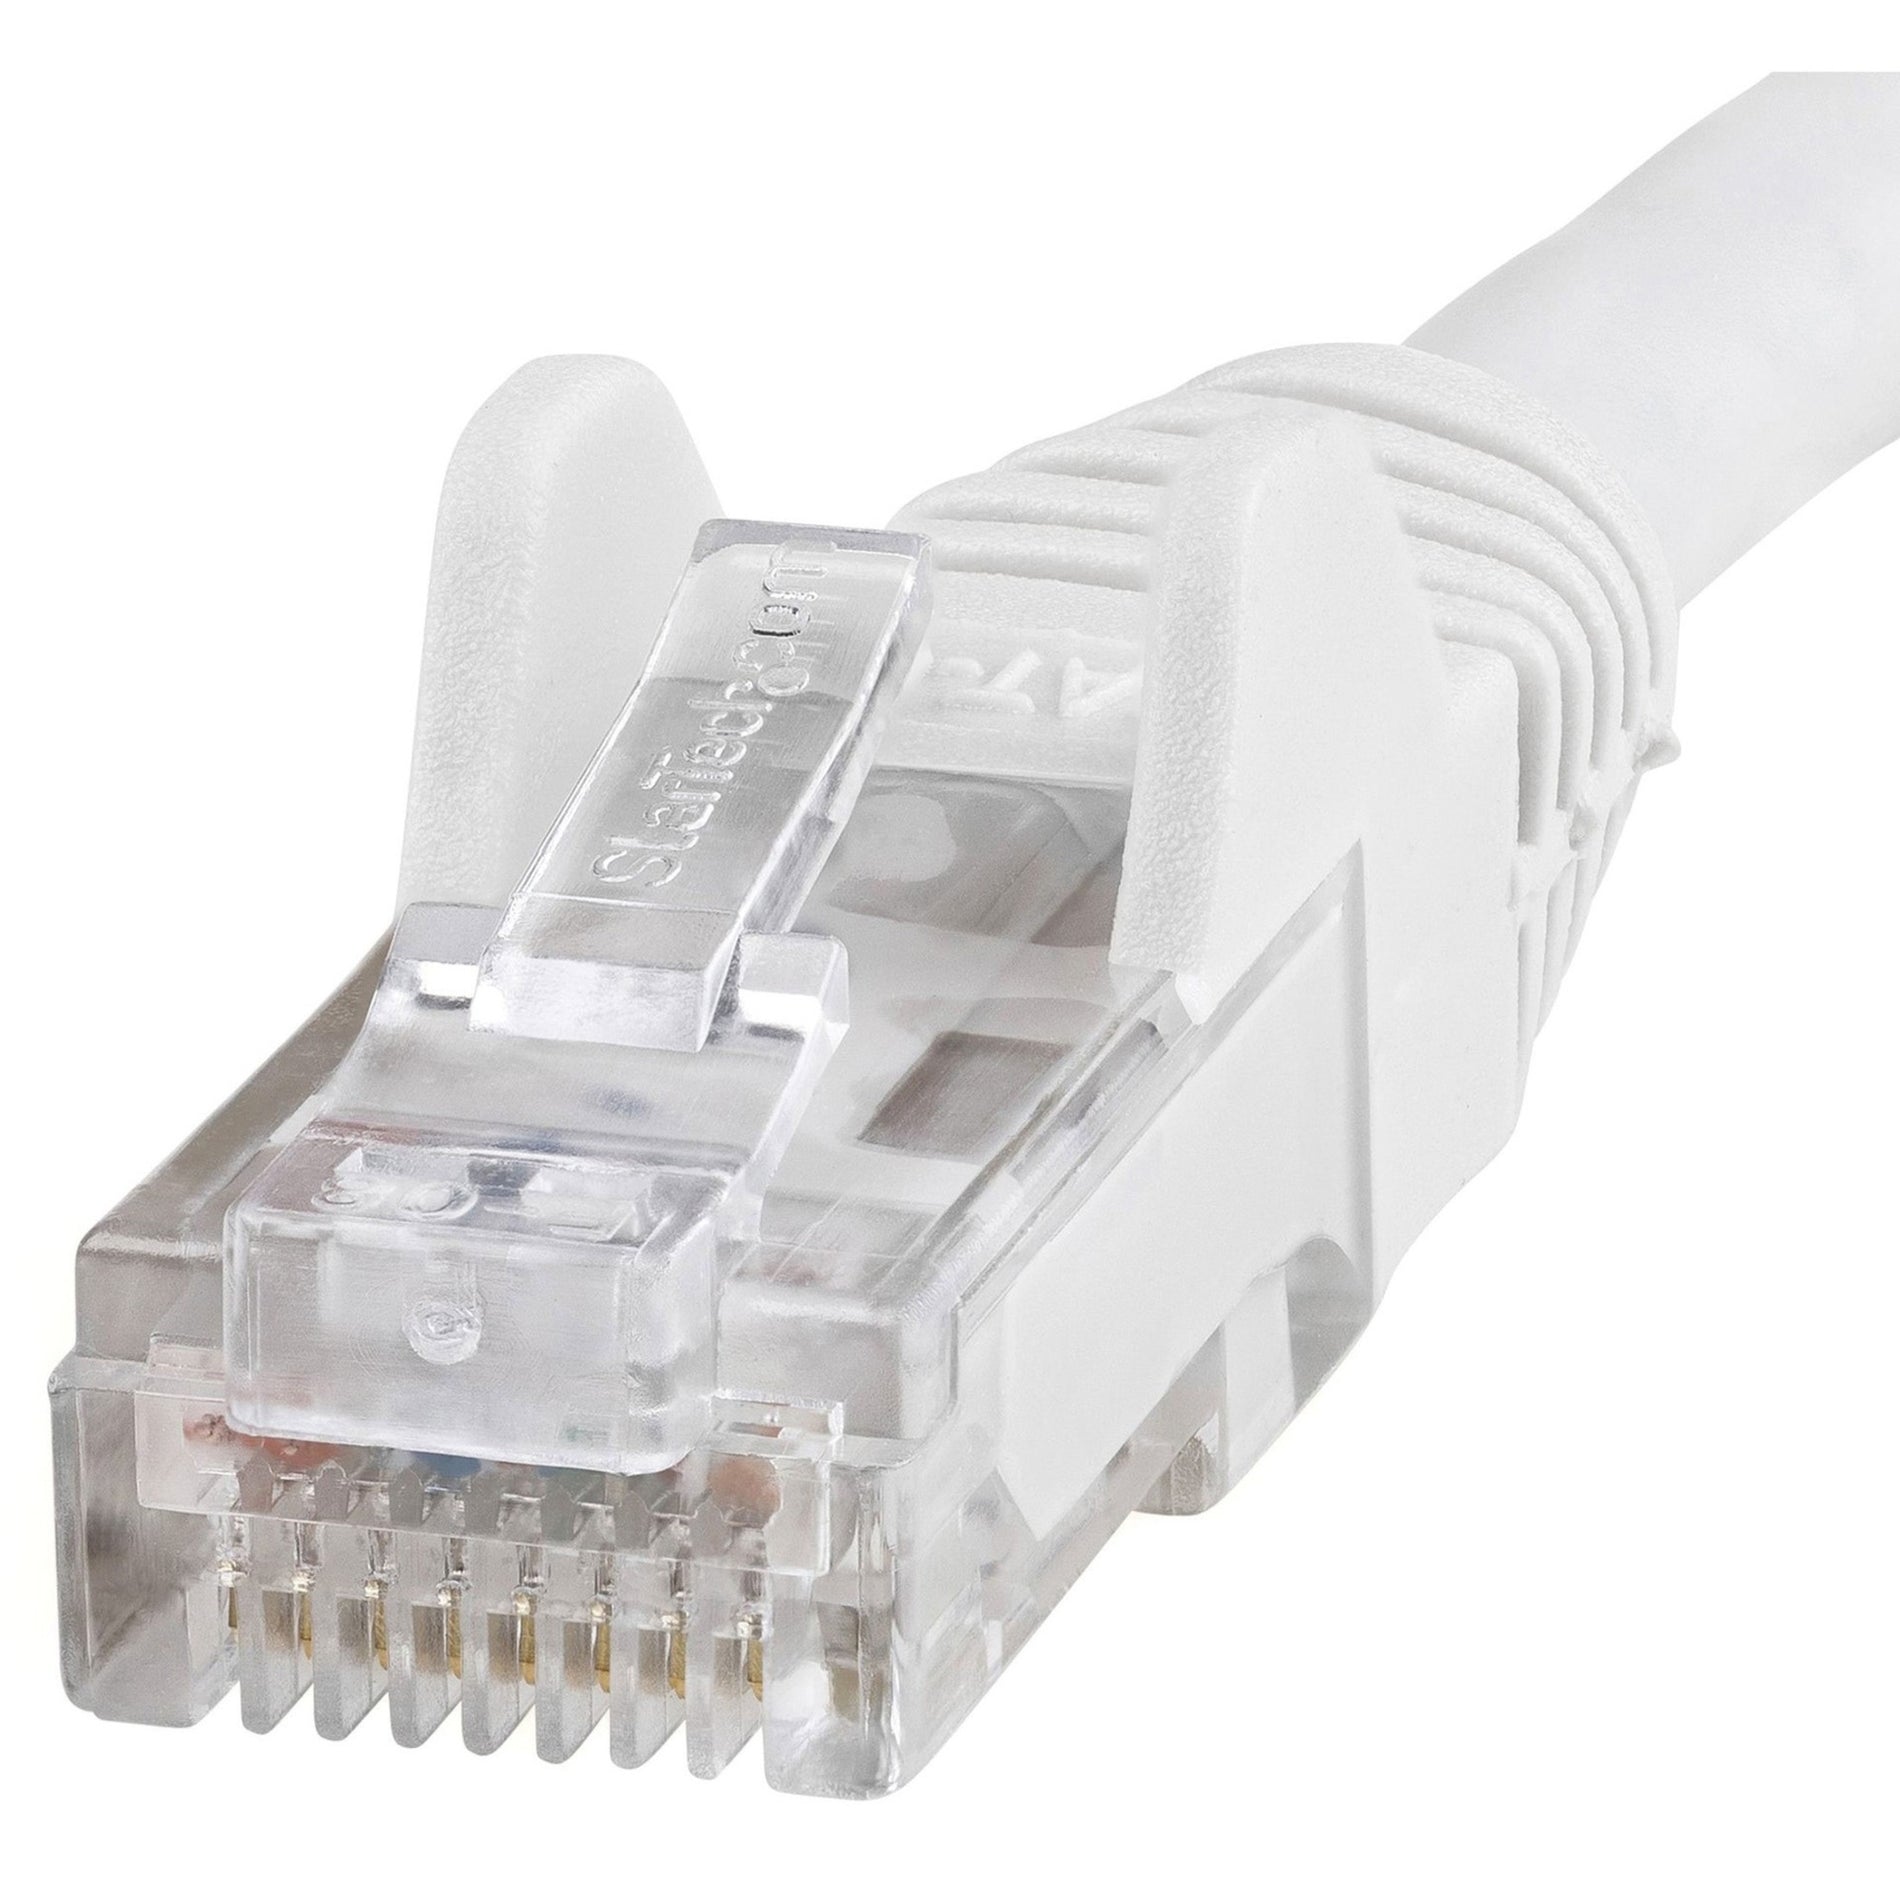 StarTech.com N6PATCH6WH Cat6 Patch Cable, 6 ft White Ethernet Cable, Snagless RJ45 Connectors